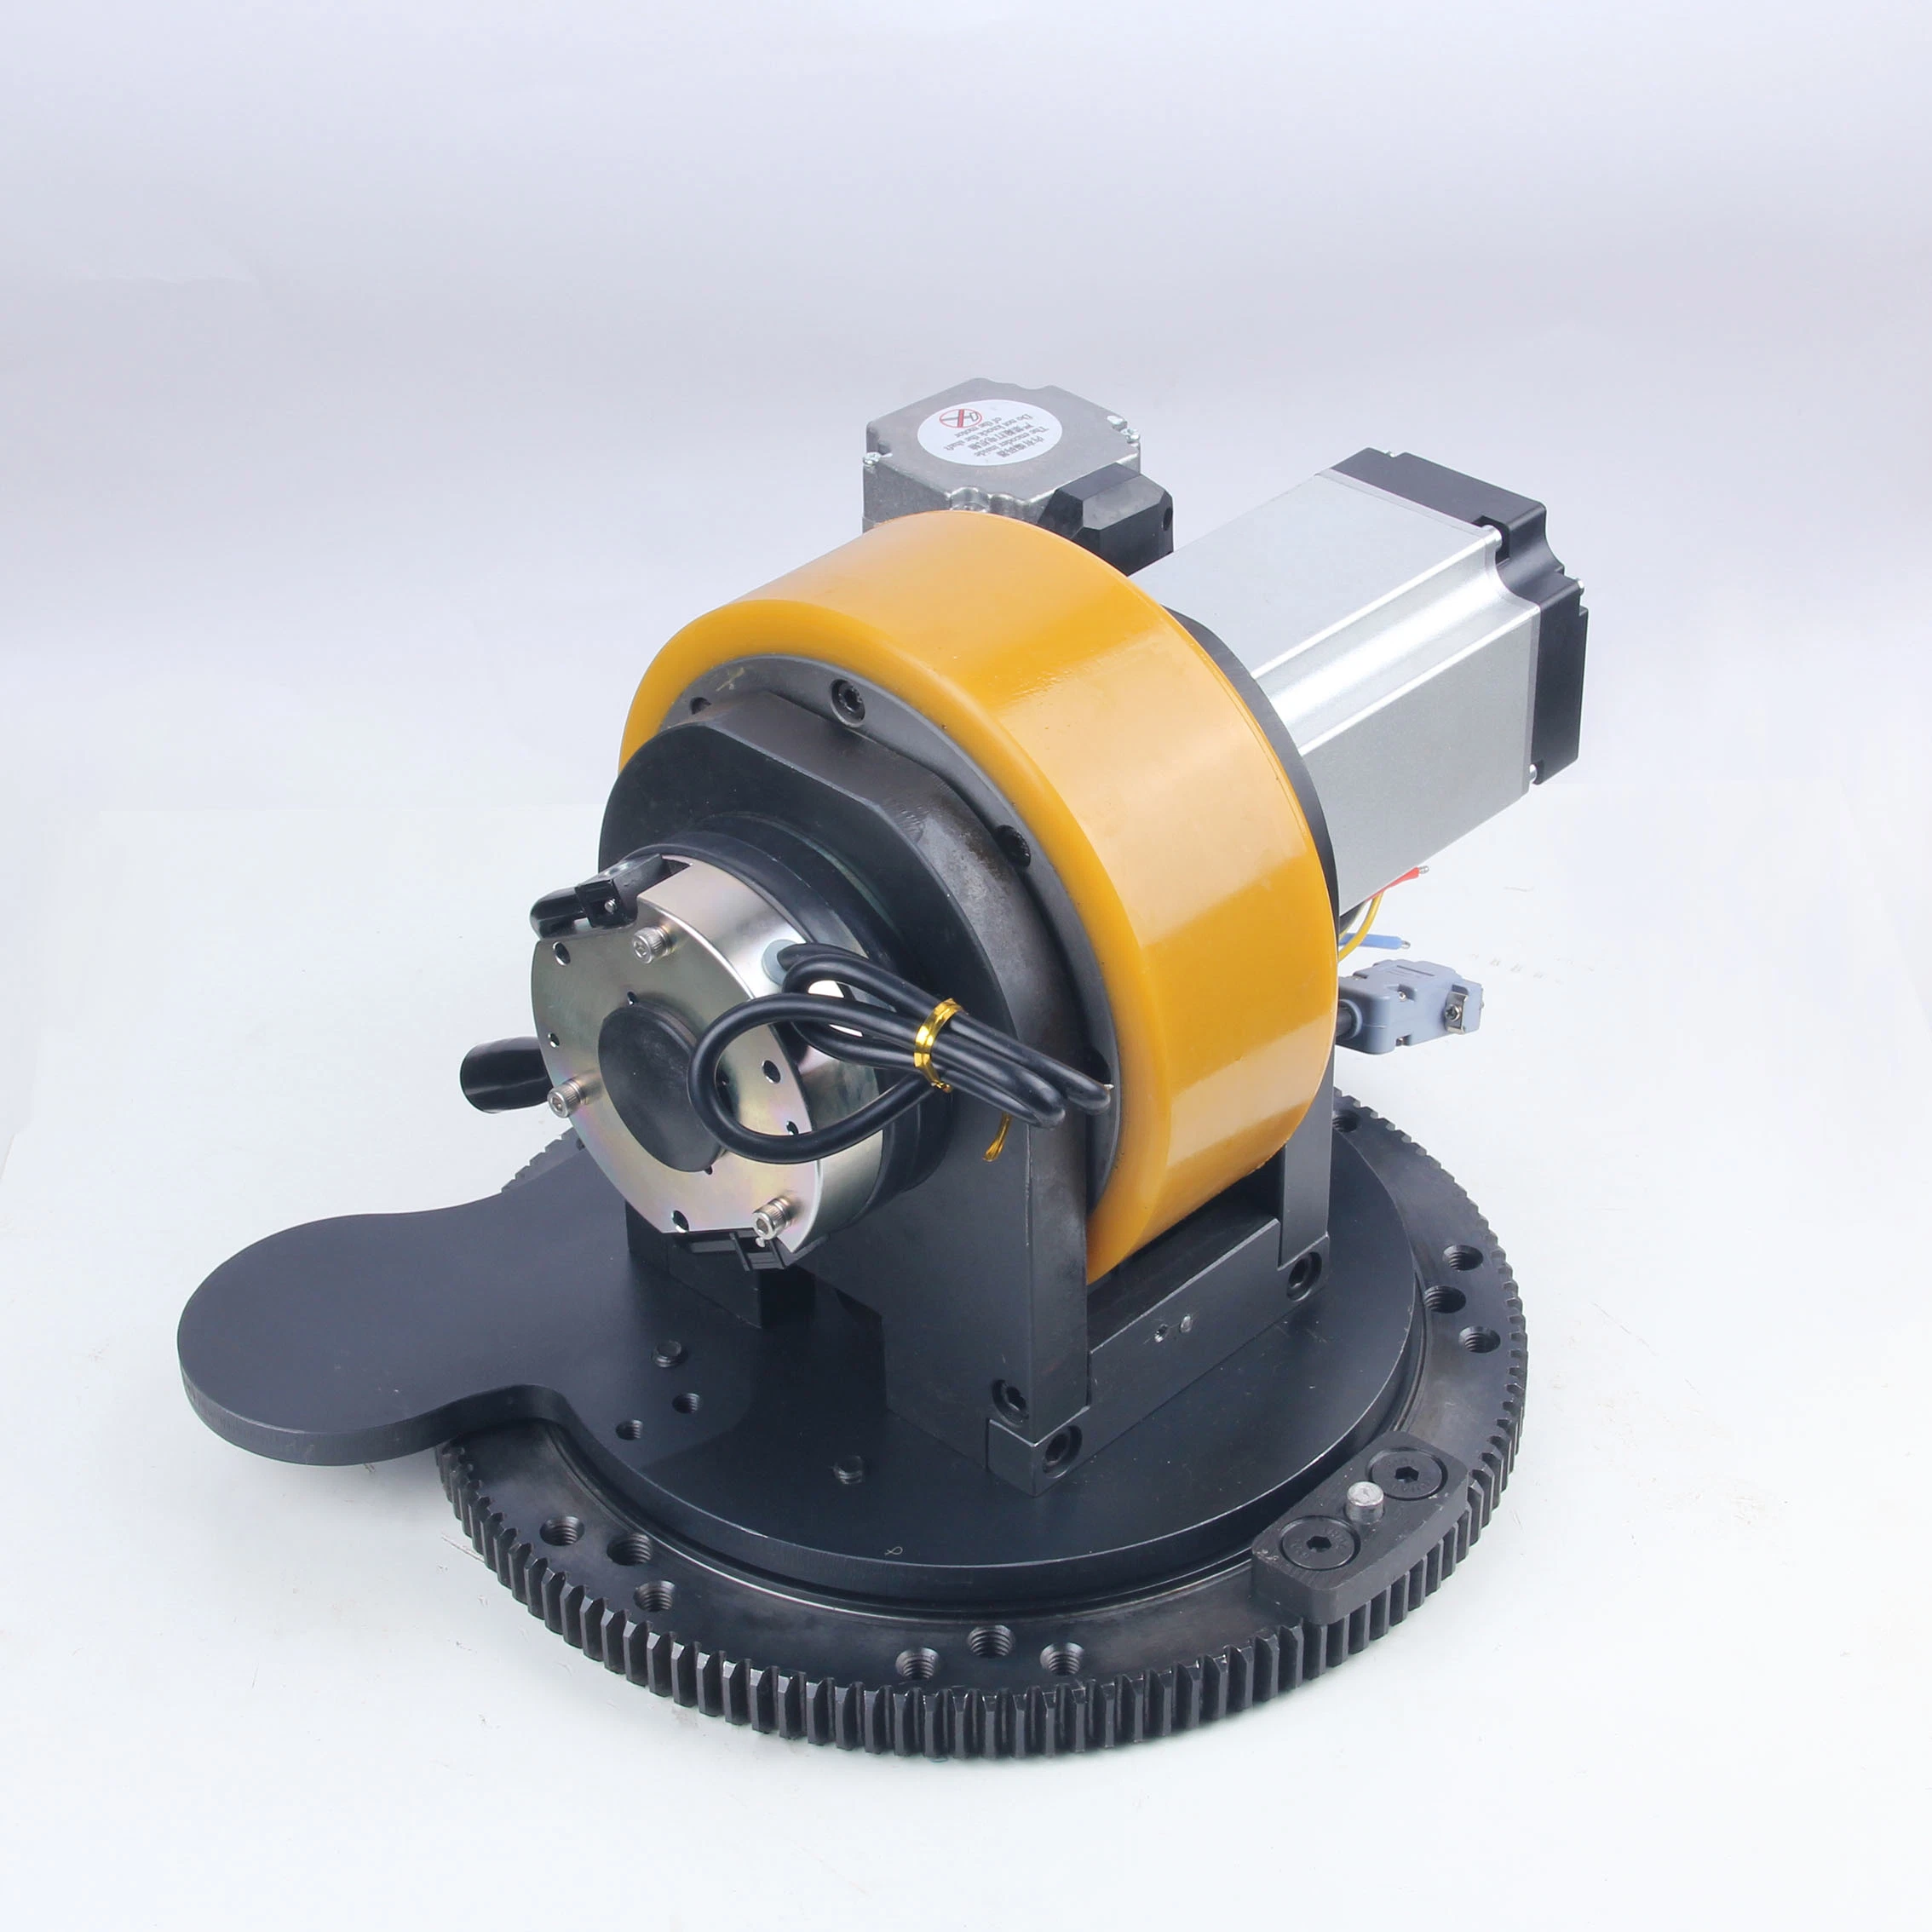 Made in China New Design Agv Accessories Steerable Drive Wheel